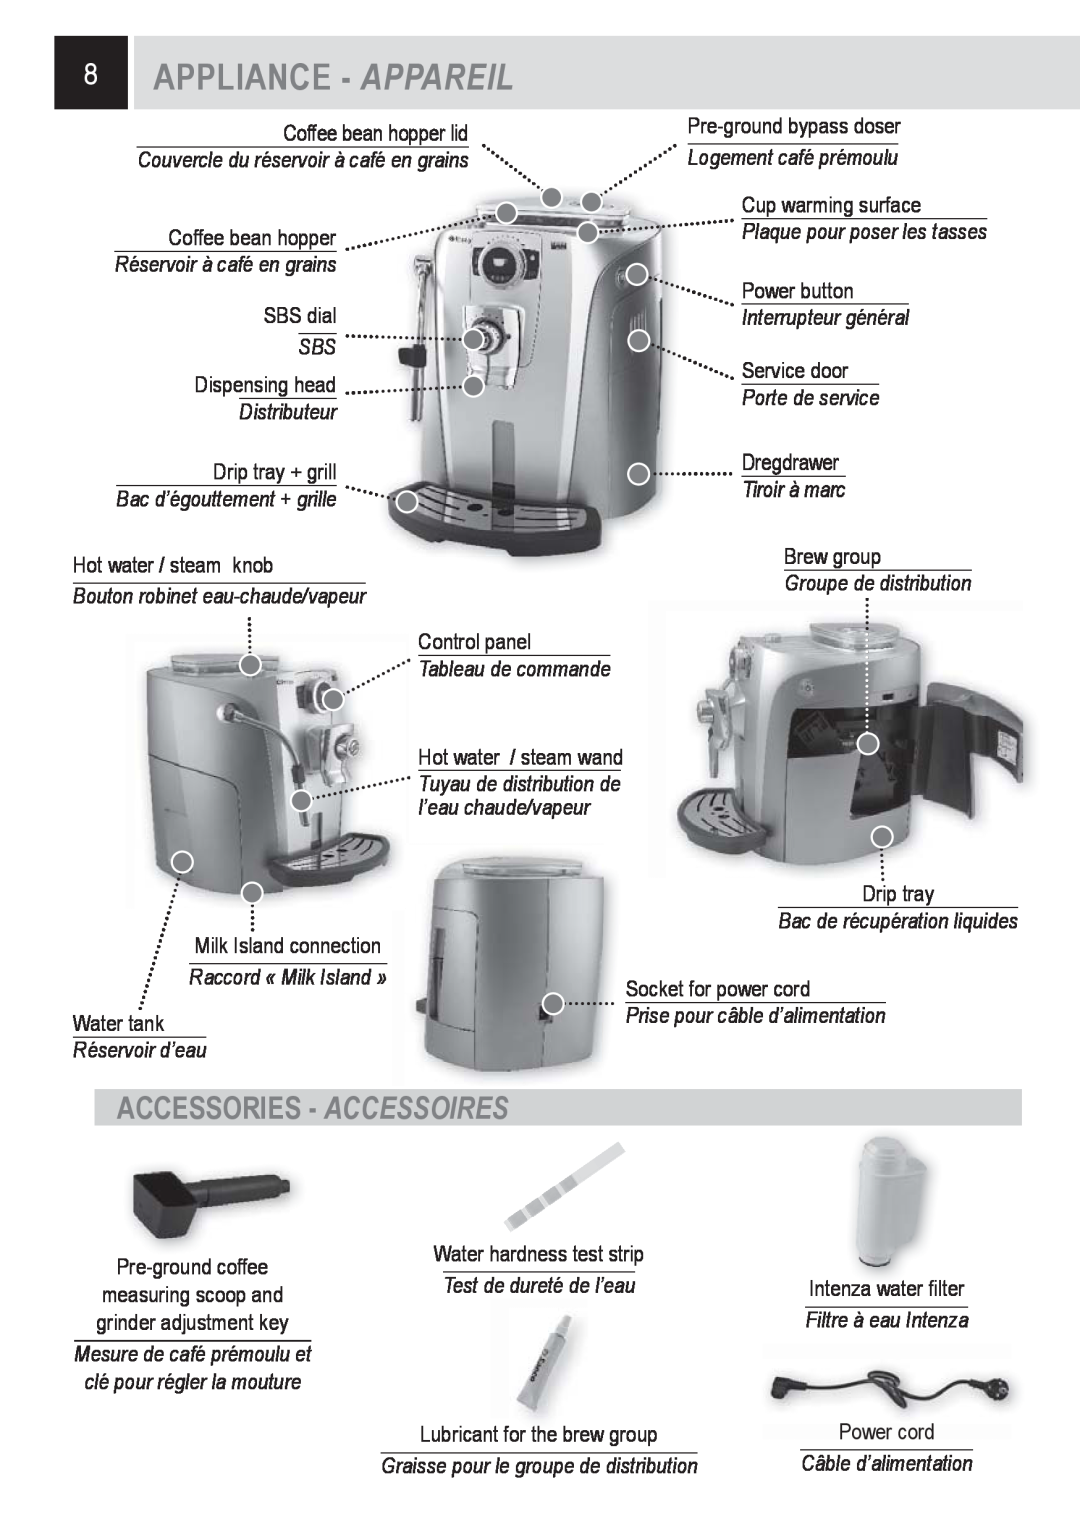 Saeco Coffee Makers 15001566 Appliance - Appareil, Accessories - Accessoires, Coffee bean hopper lid, Cup warming surface 